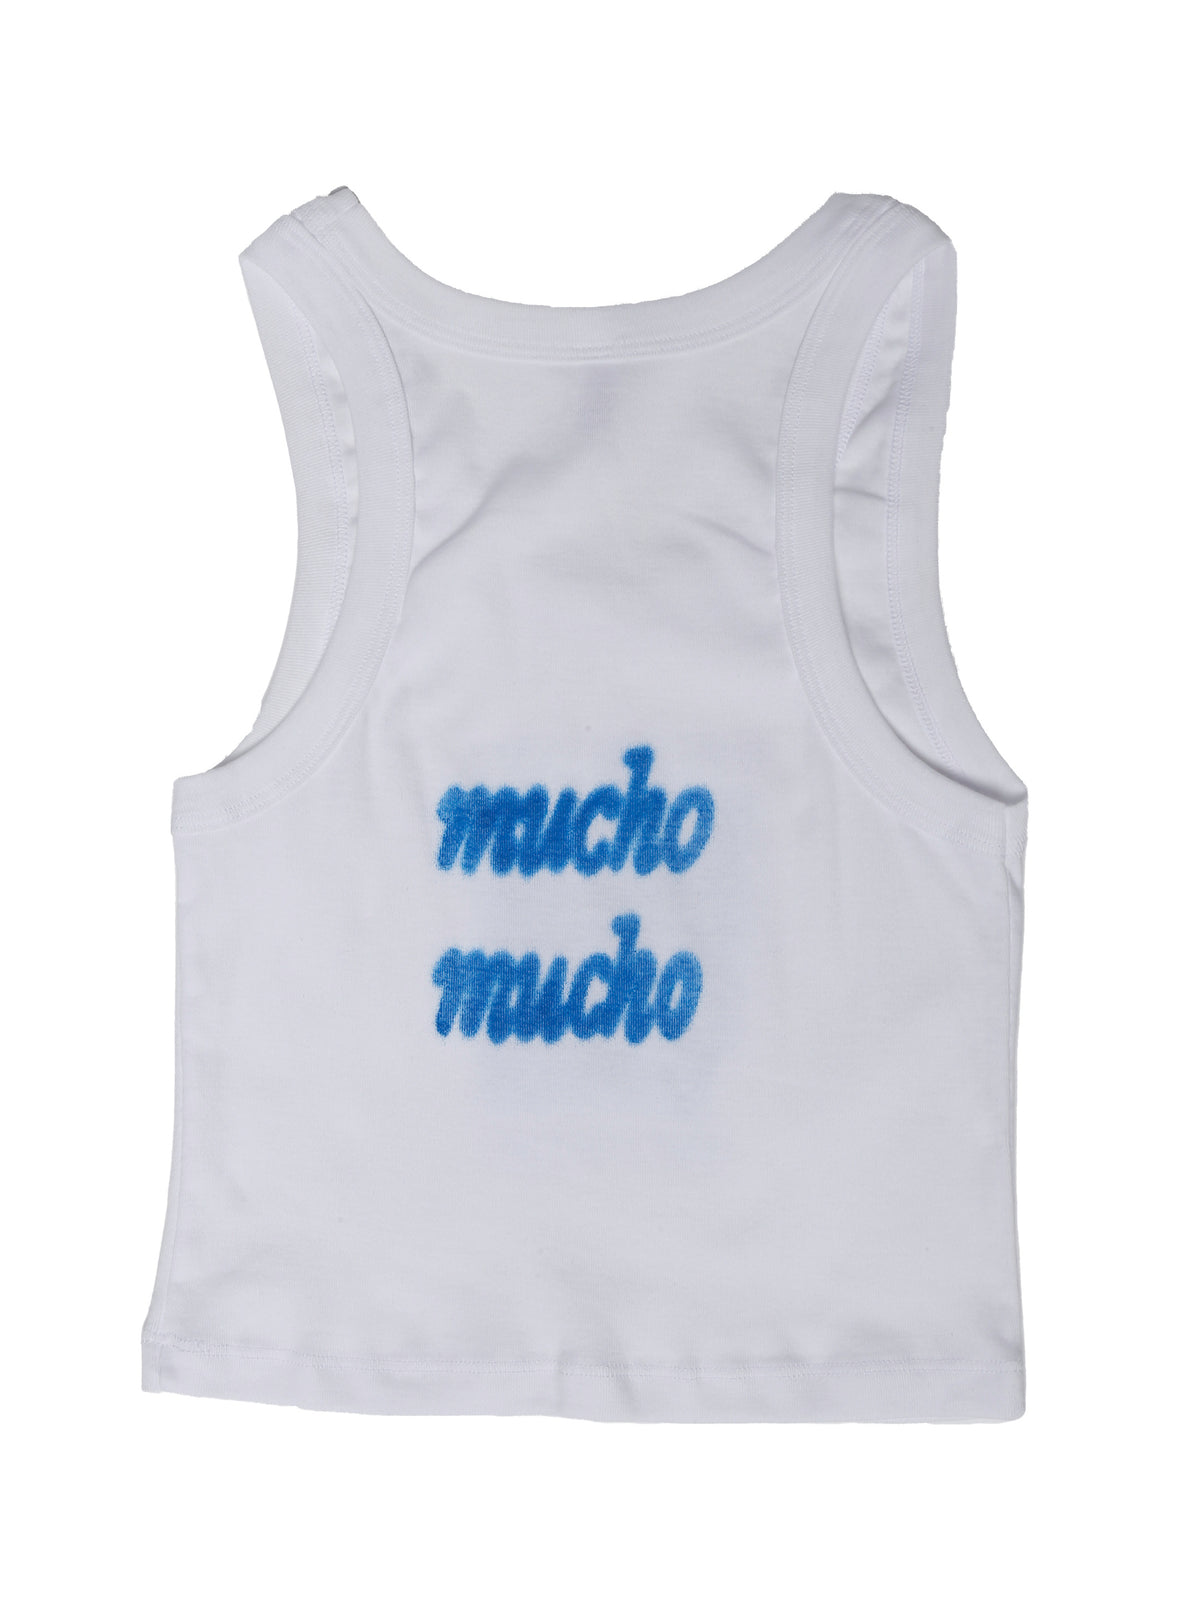 MUCHO MUCHO 'What can I say? What can I do?' LA Apparel tank by Maryssa Rose Chavez